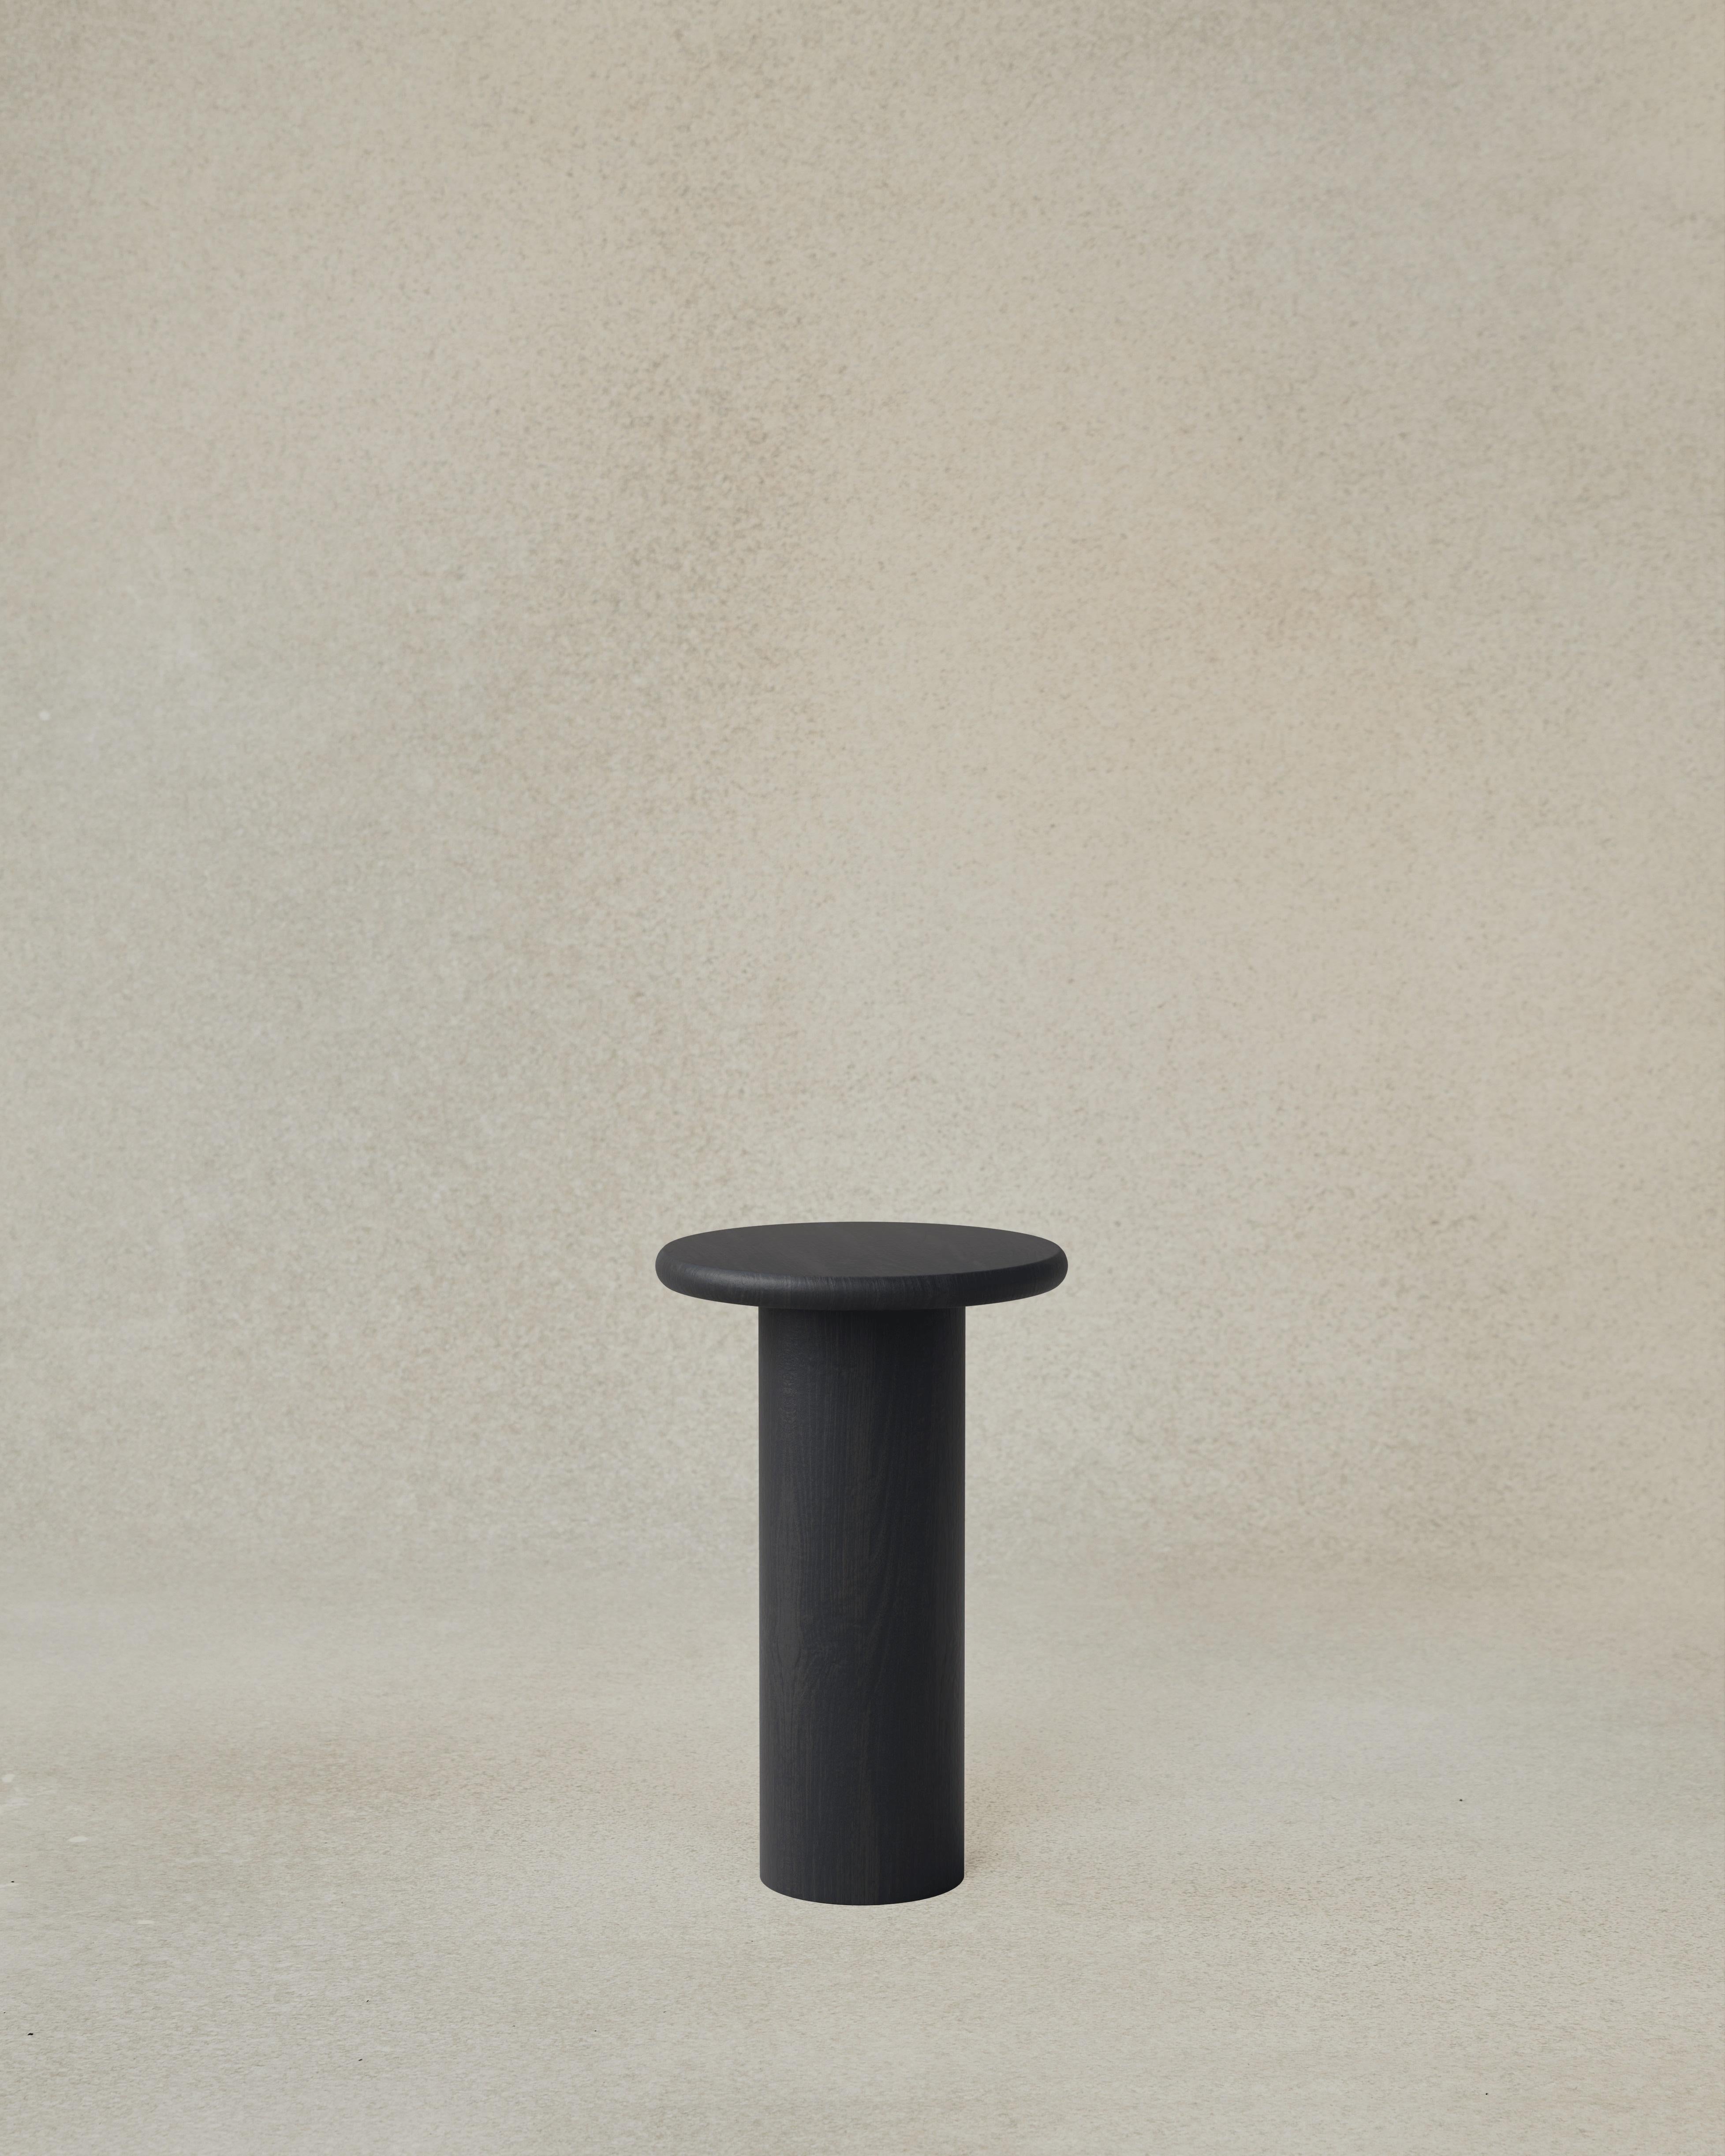 The Raindrop 300 is the smallest and tallest Raindrop we offer in the series, designed to be a side table or bedside table for your home and now available in a range of finishes to suit any interior or style. The raindrops nestle together to form a